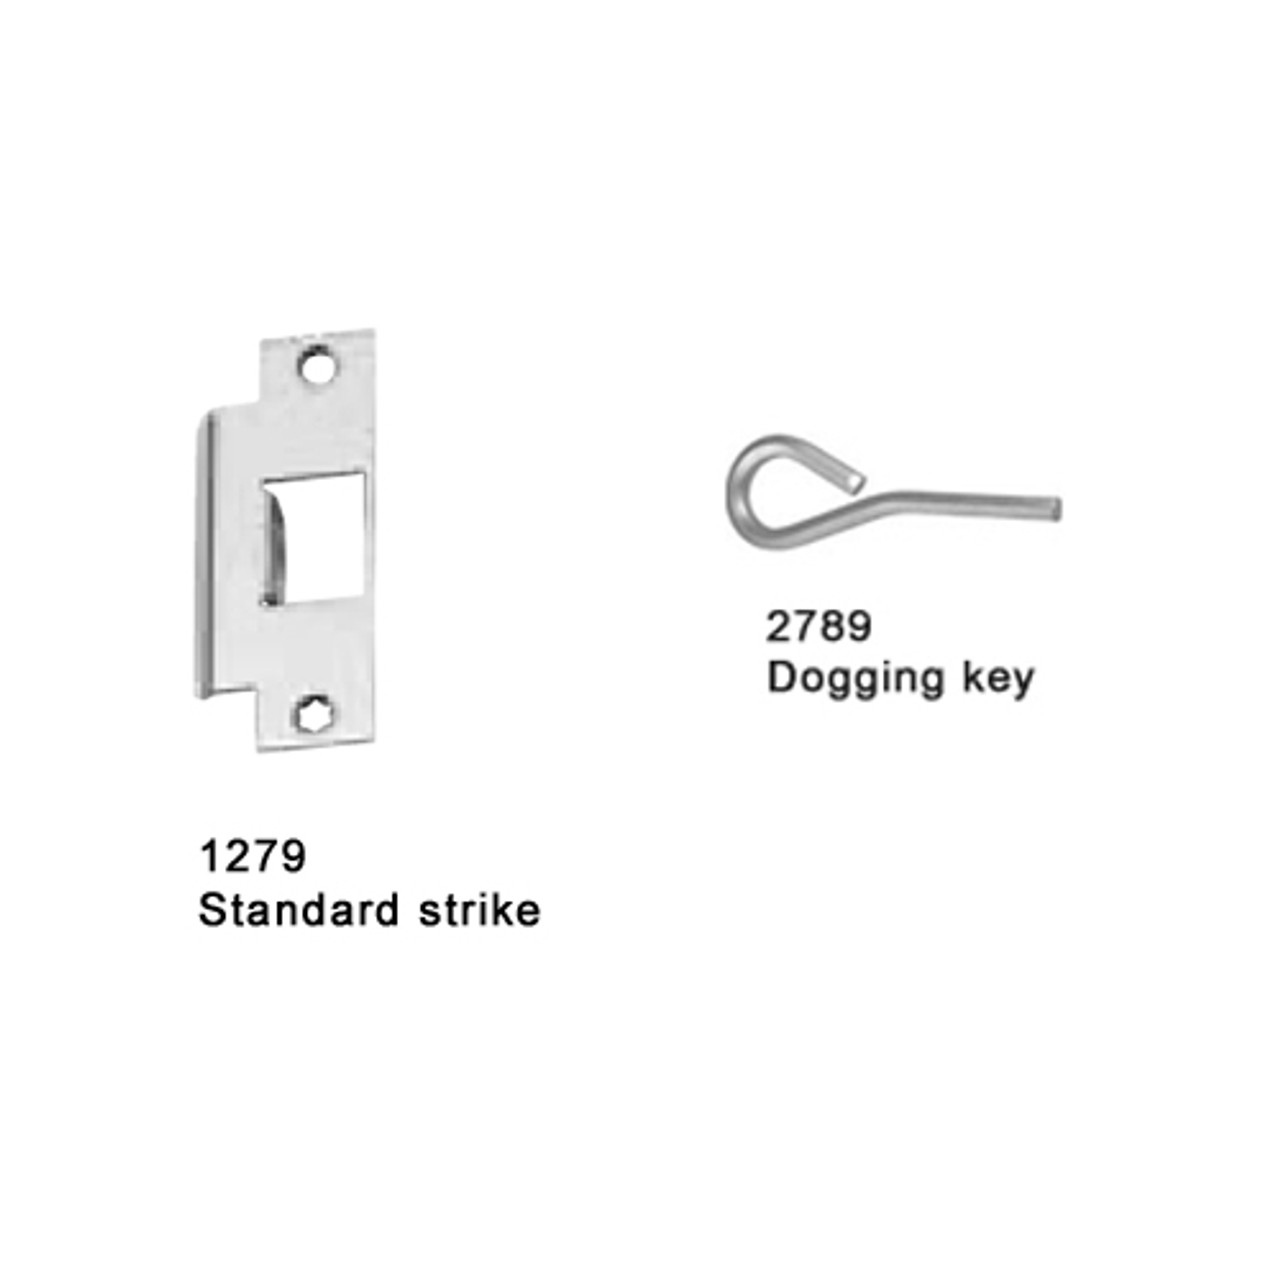 25-M-TP-US10-4-RHR Falcon 25 Series Mortise Lock Devices with 512TP Thumbpiece Trim in Satin Bronze